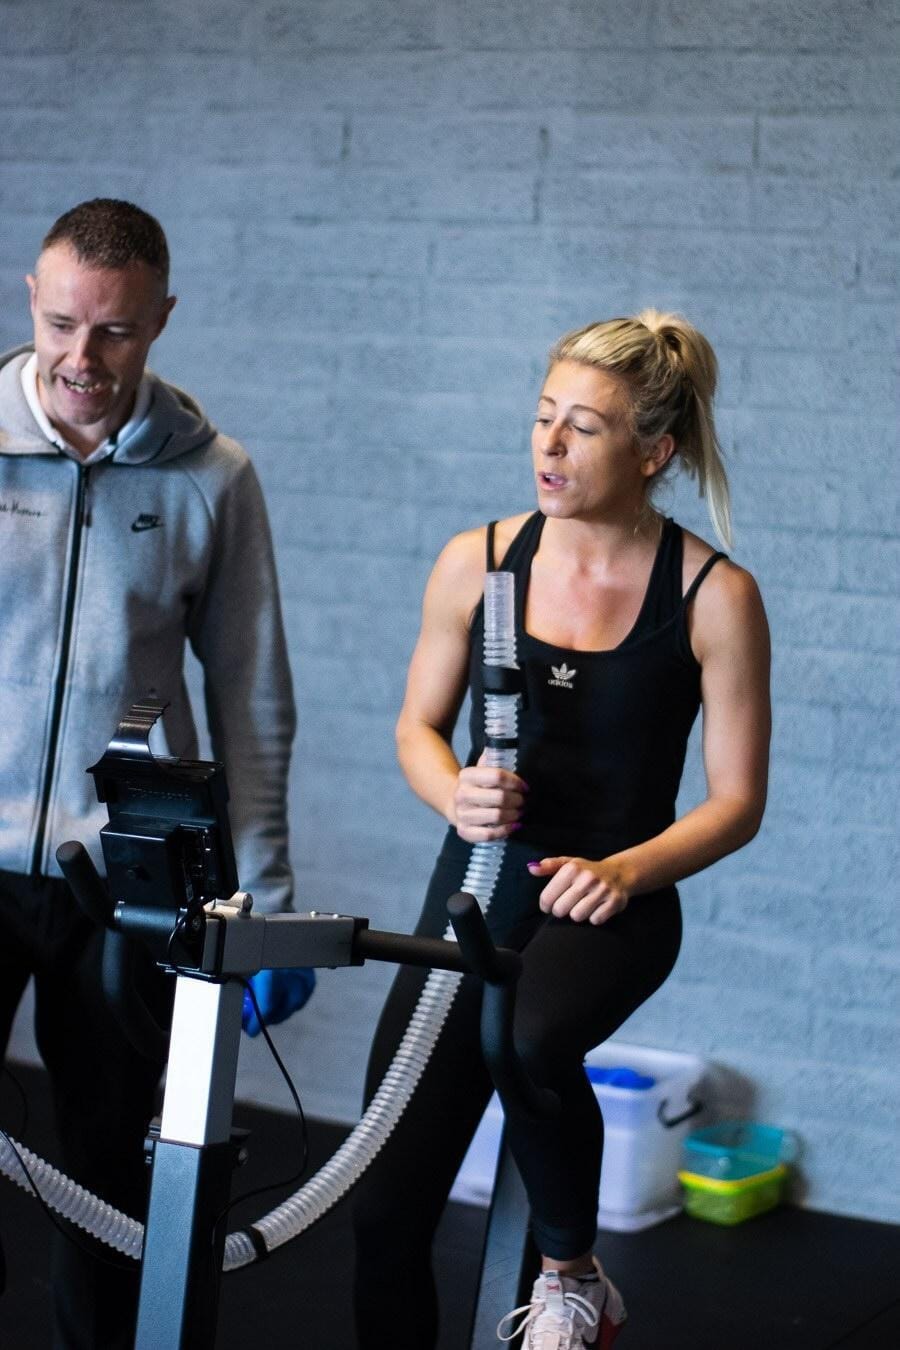 Fitness professional alongside woman sitting on a stationary bicycle with a VO2 tube in her hand as she exhales